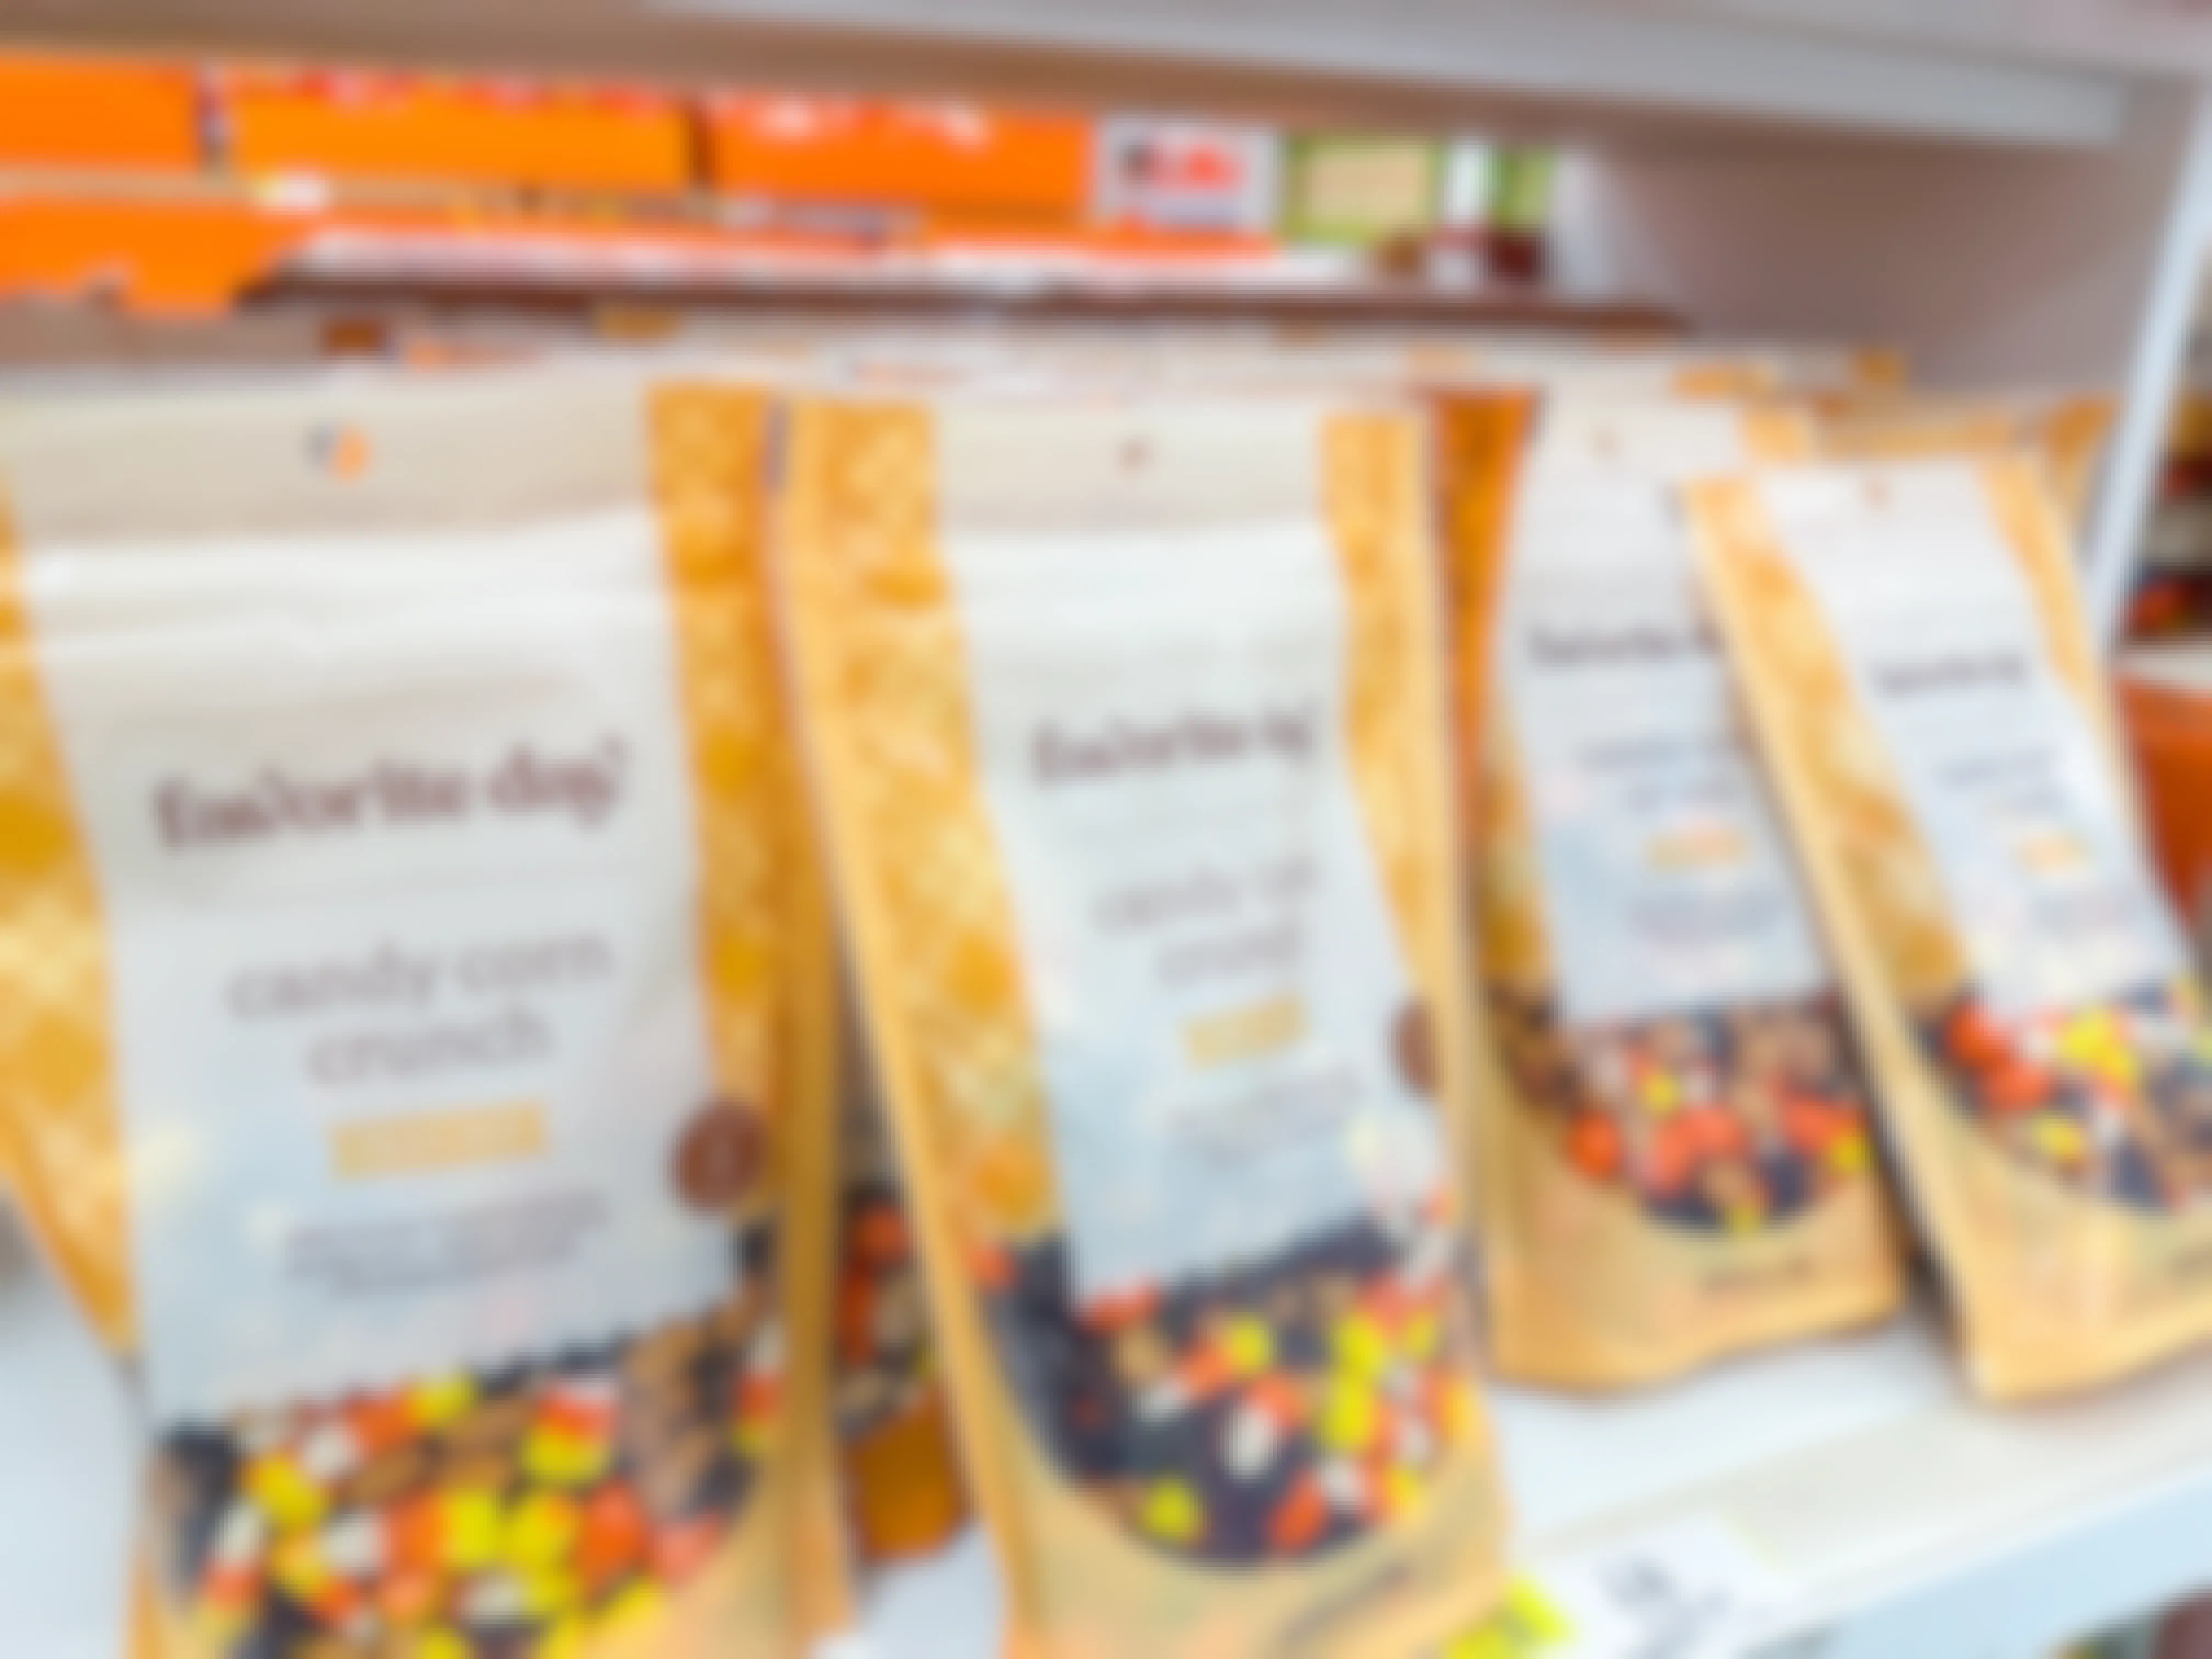 target favorite day candy corn crunch snack bags on the shelf